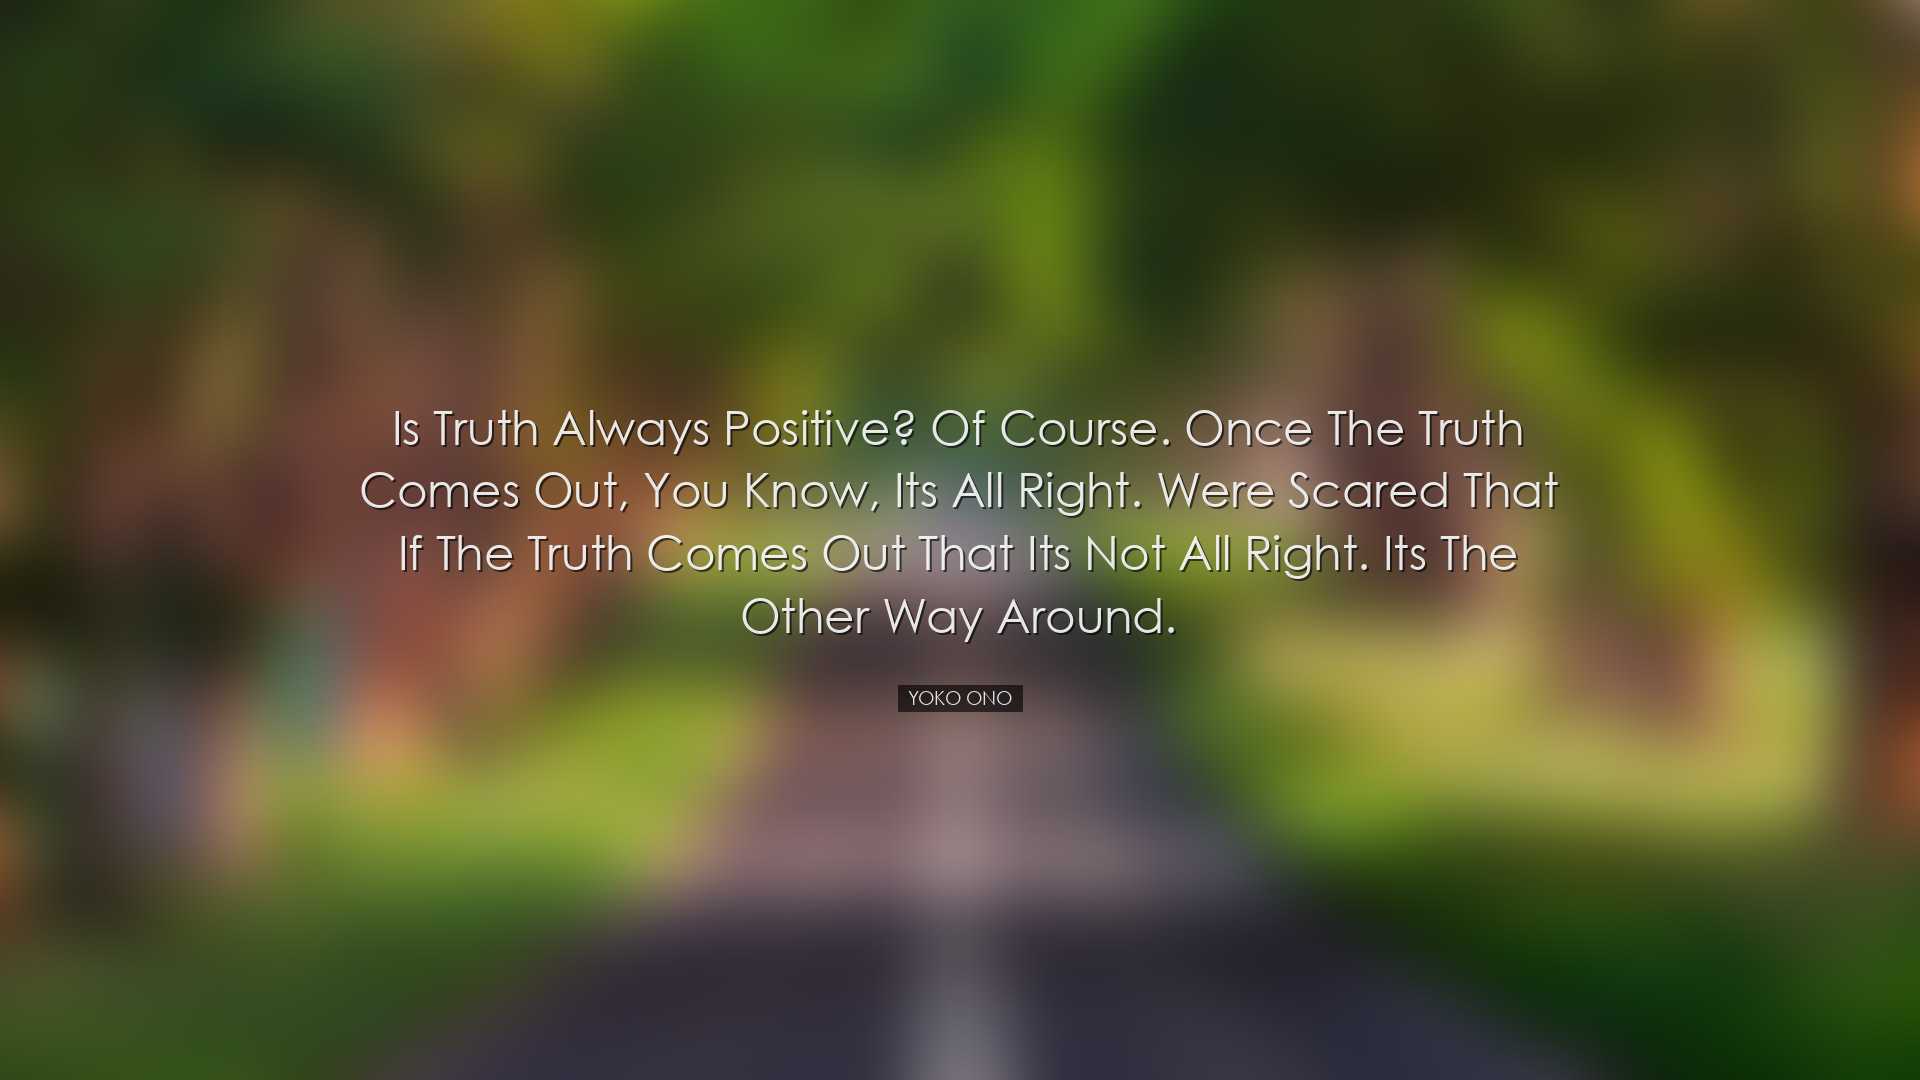 Is truth always positive? Of course. Once the truth comes out, you